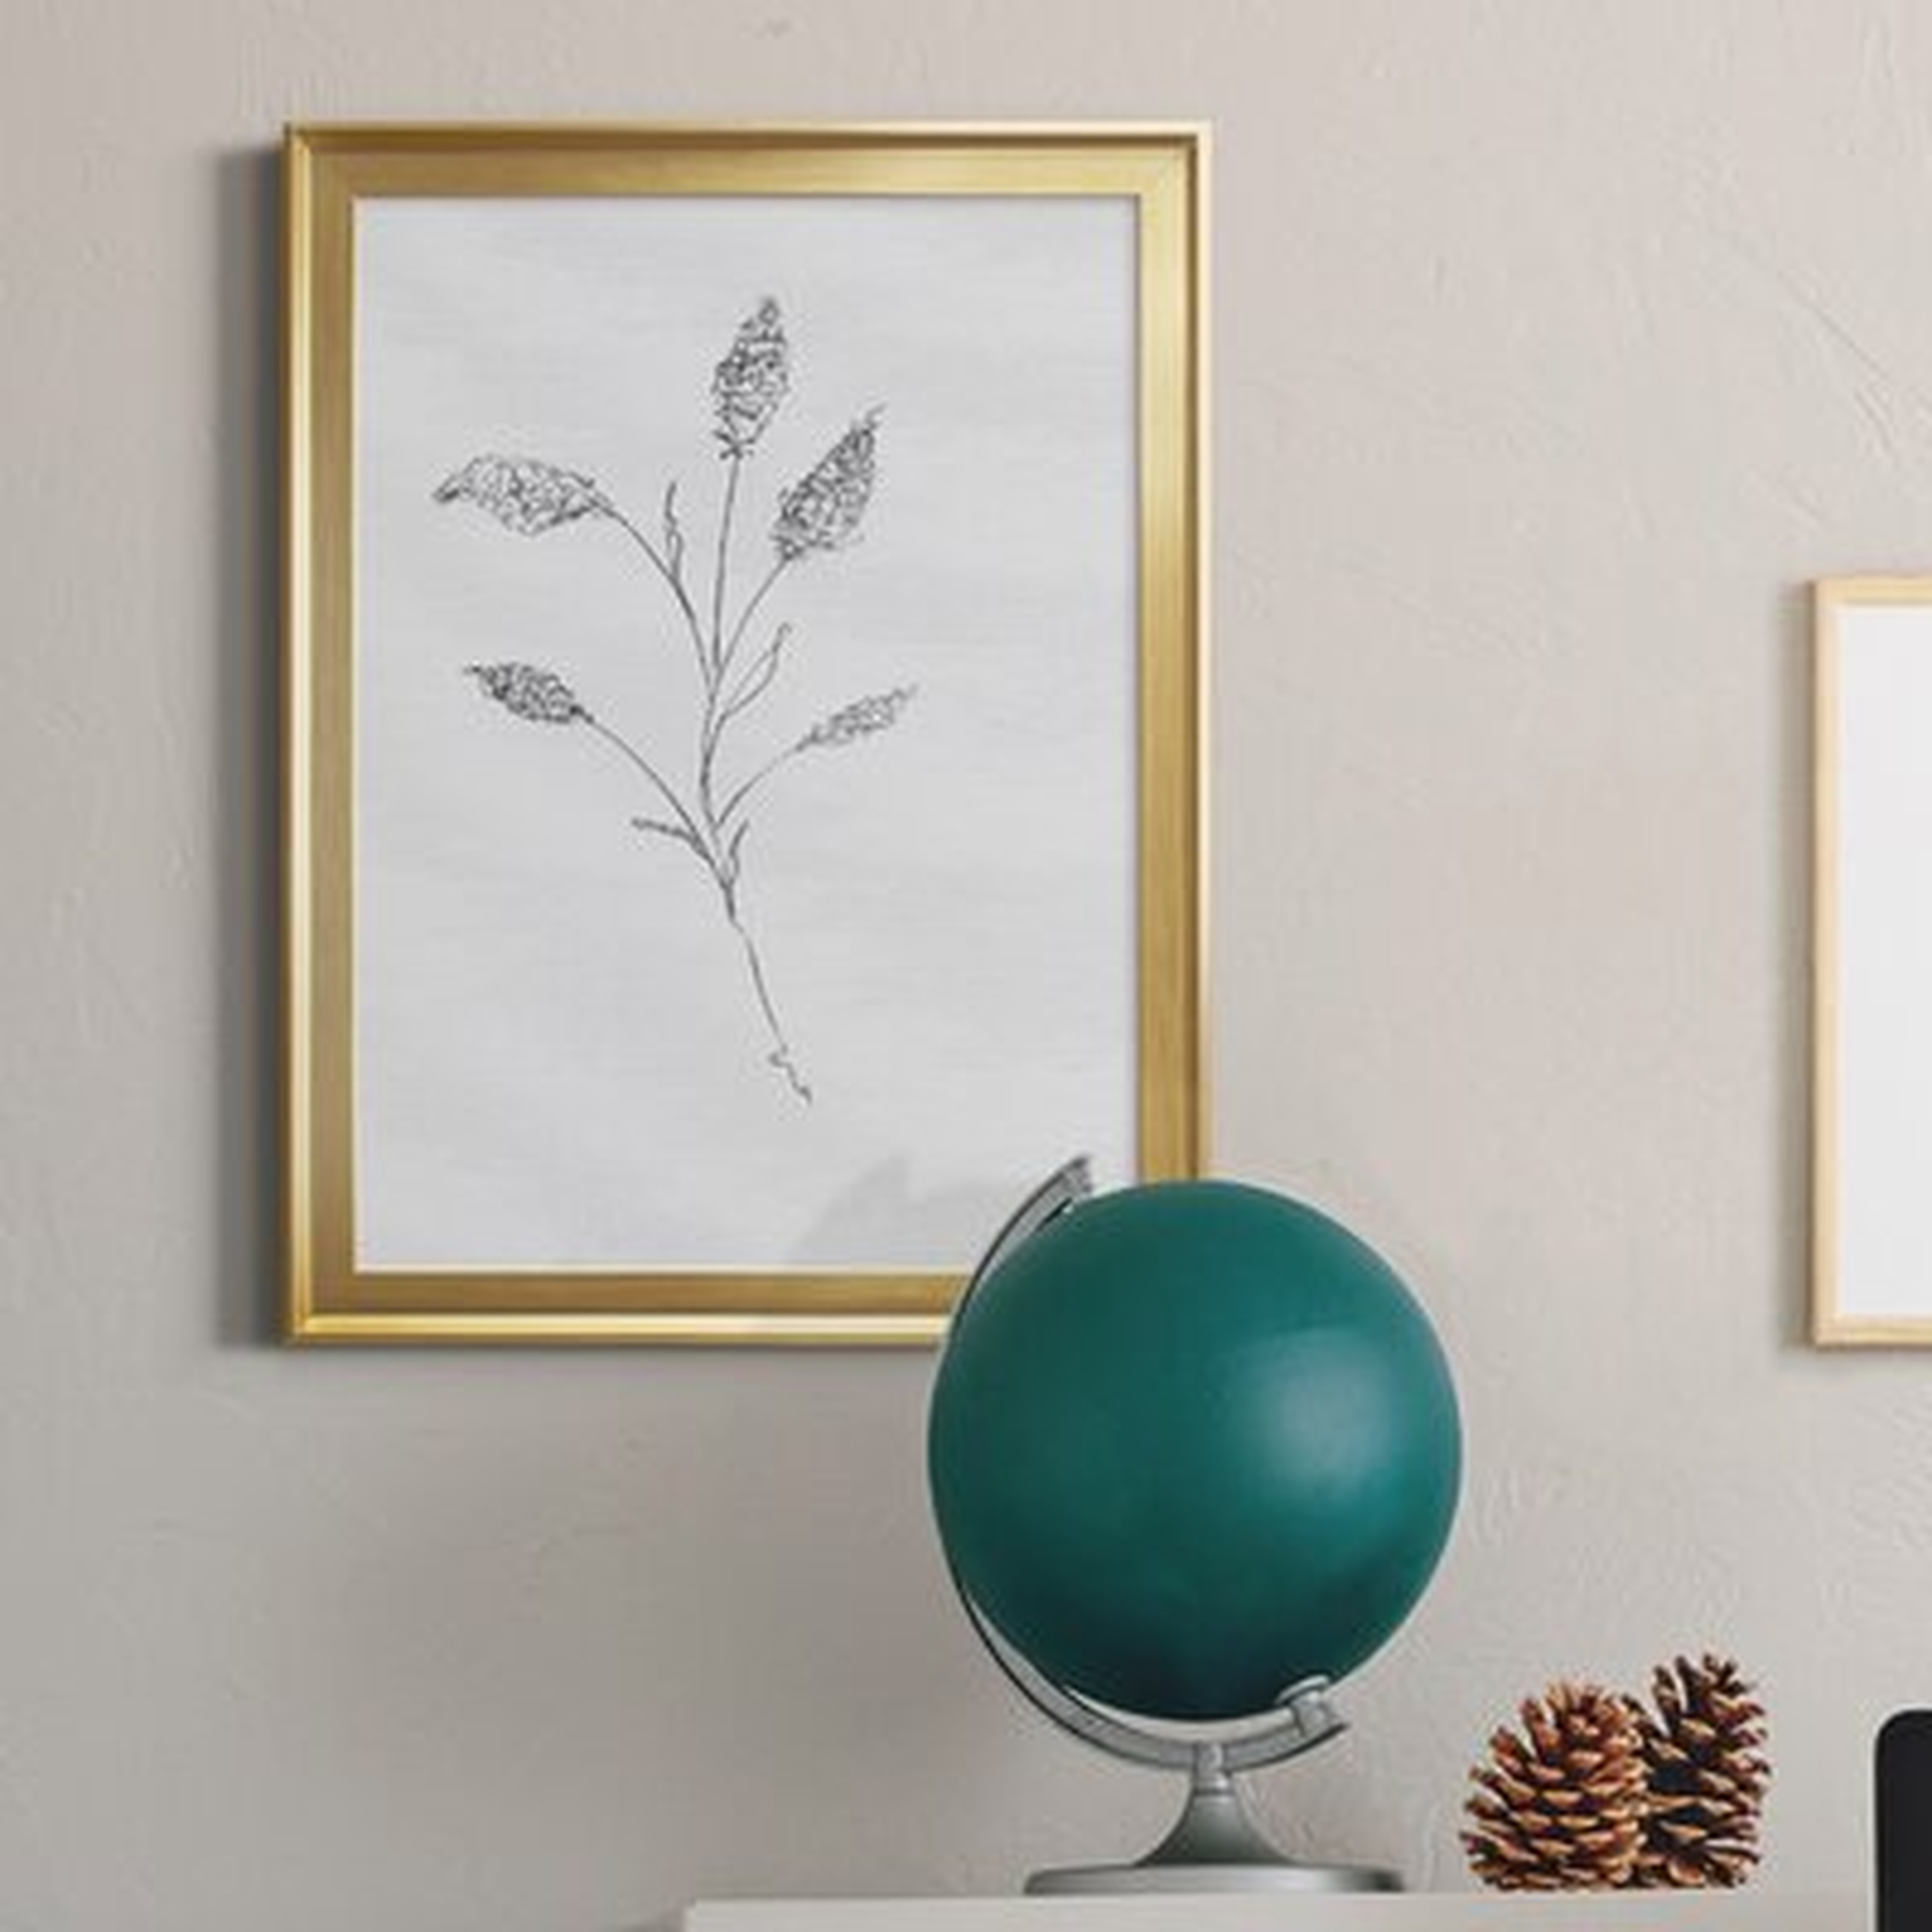 Floral Sketch Ii - Picture Frame Print on Canvas - Wayfair